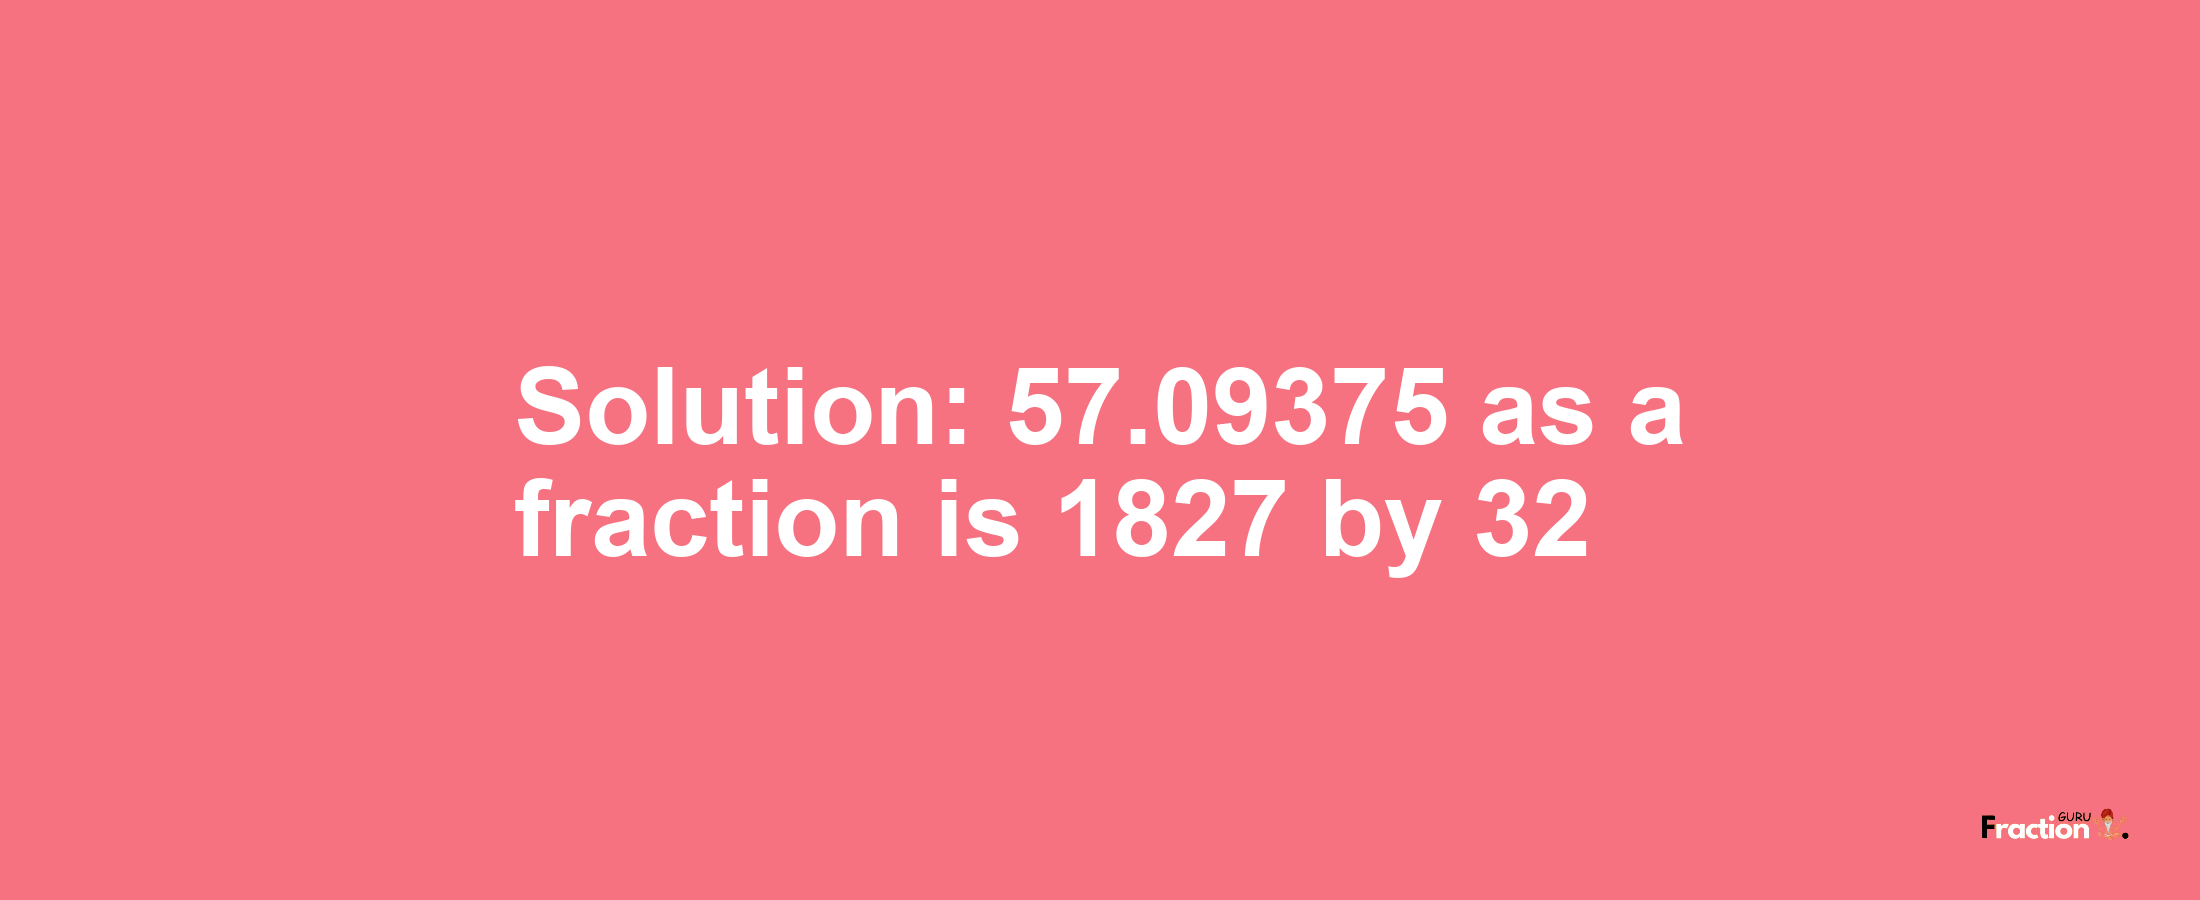 Solution:57.09375 as a fraction is 1827/32